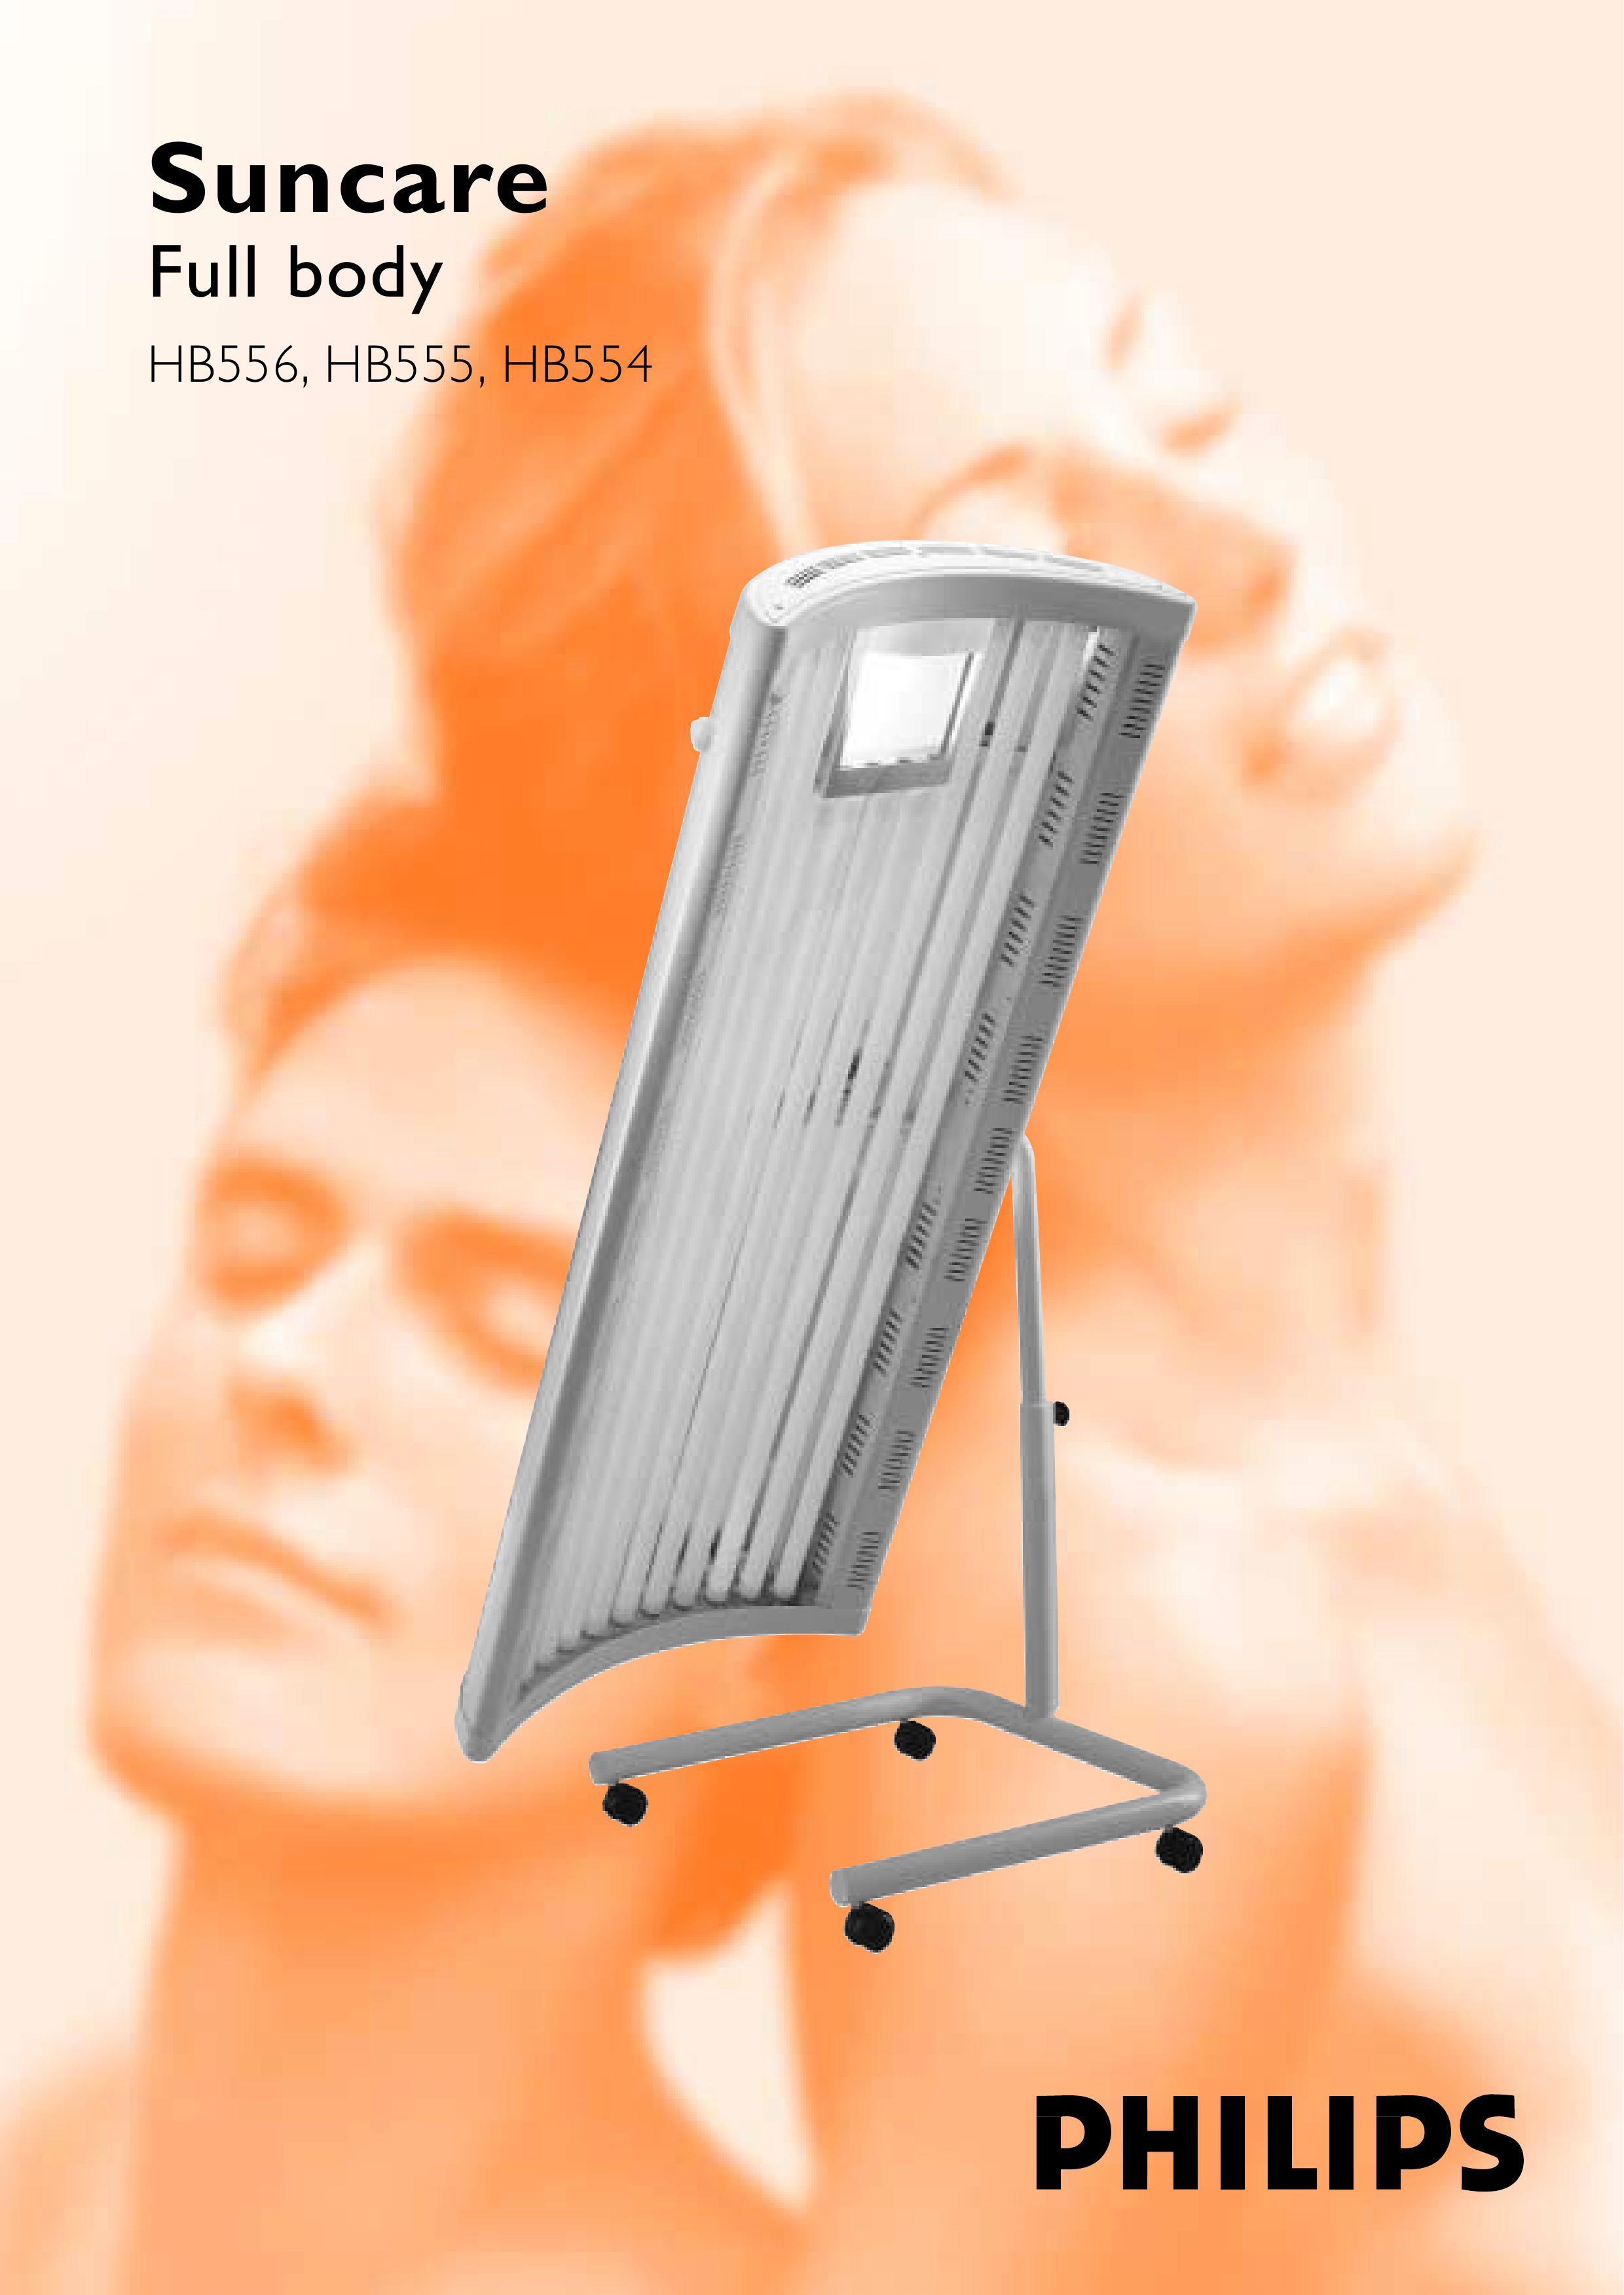 Philips HB556 Light Therapy Device User Manual